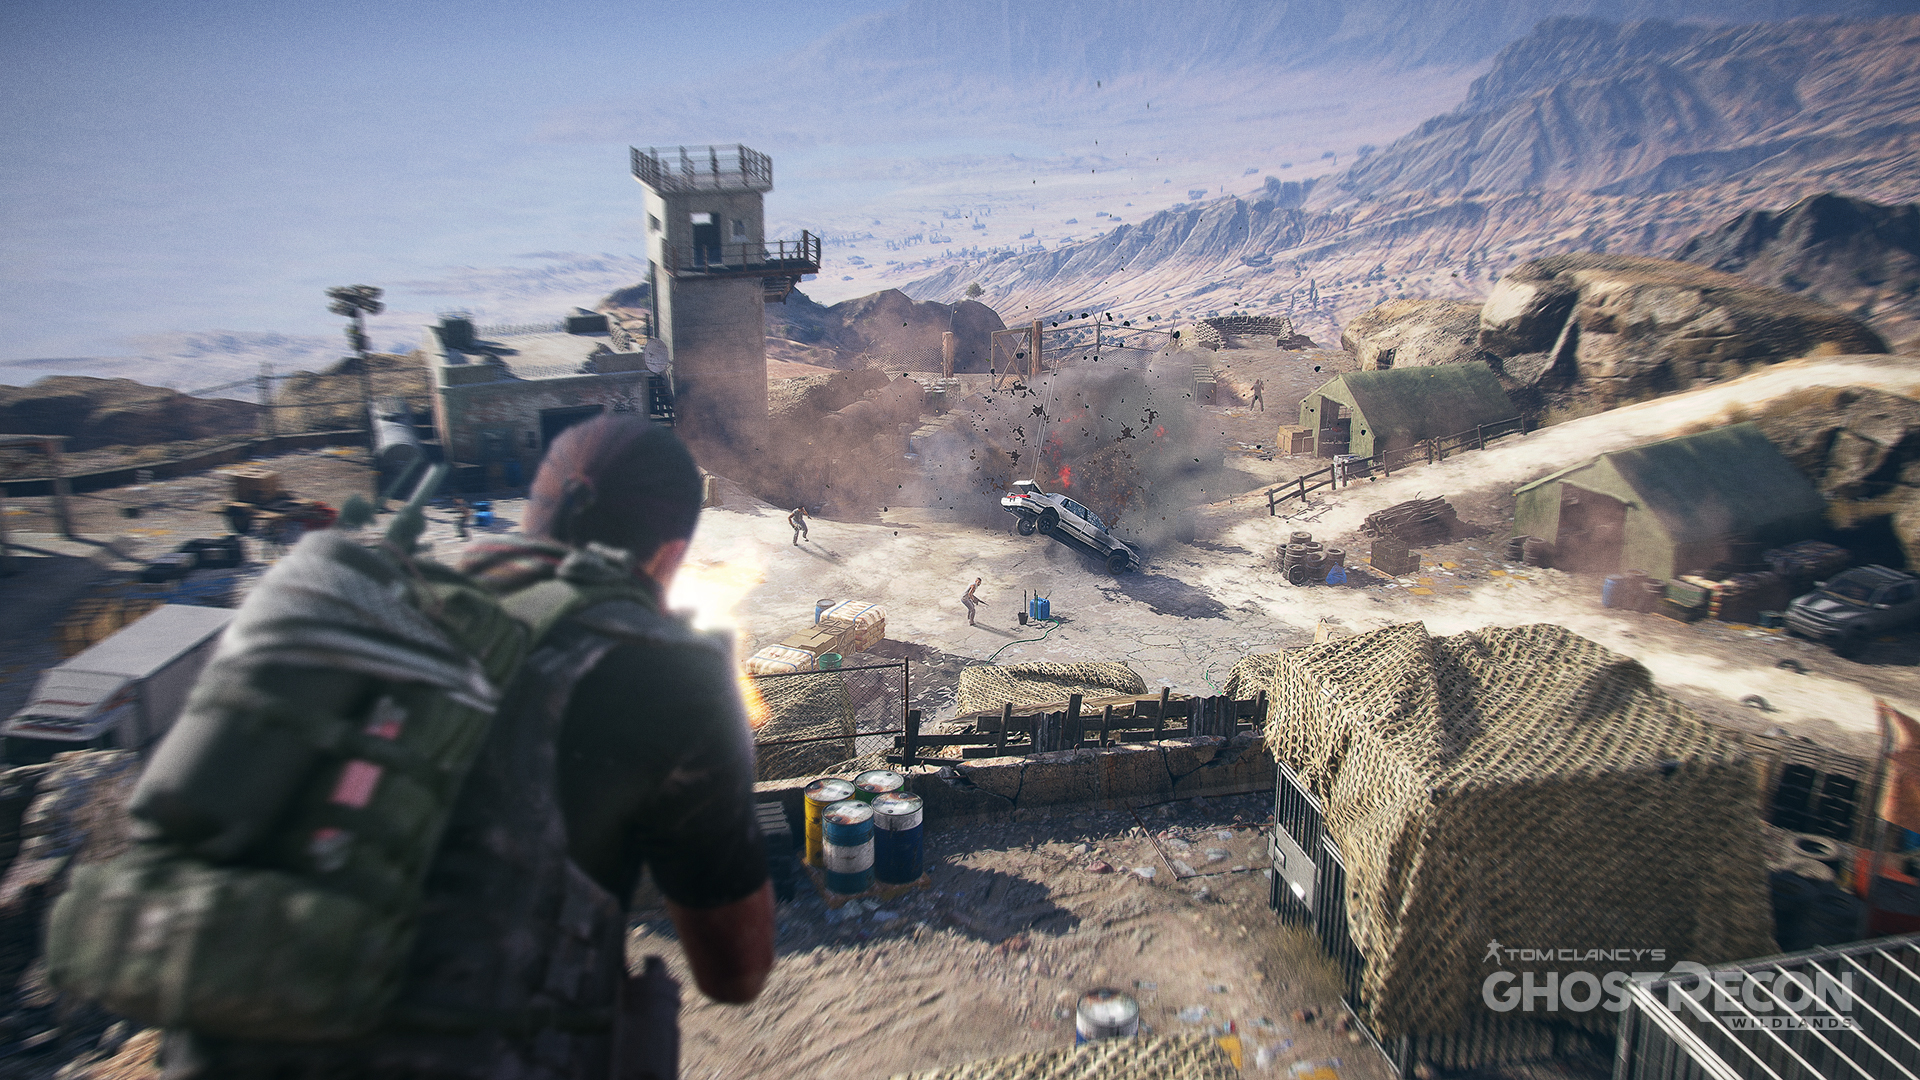 Ghost Recon Wildlands Update Version 1.30 Full Patch Notes (PS4, Xbox One, PC)